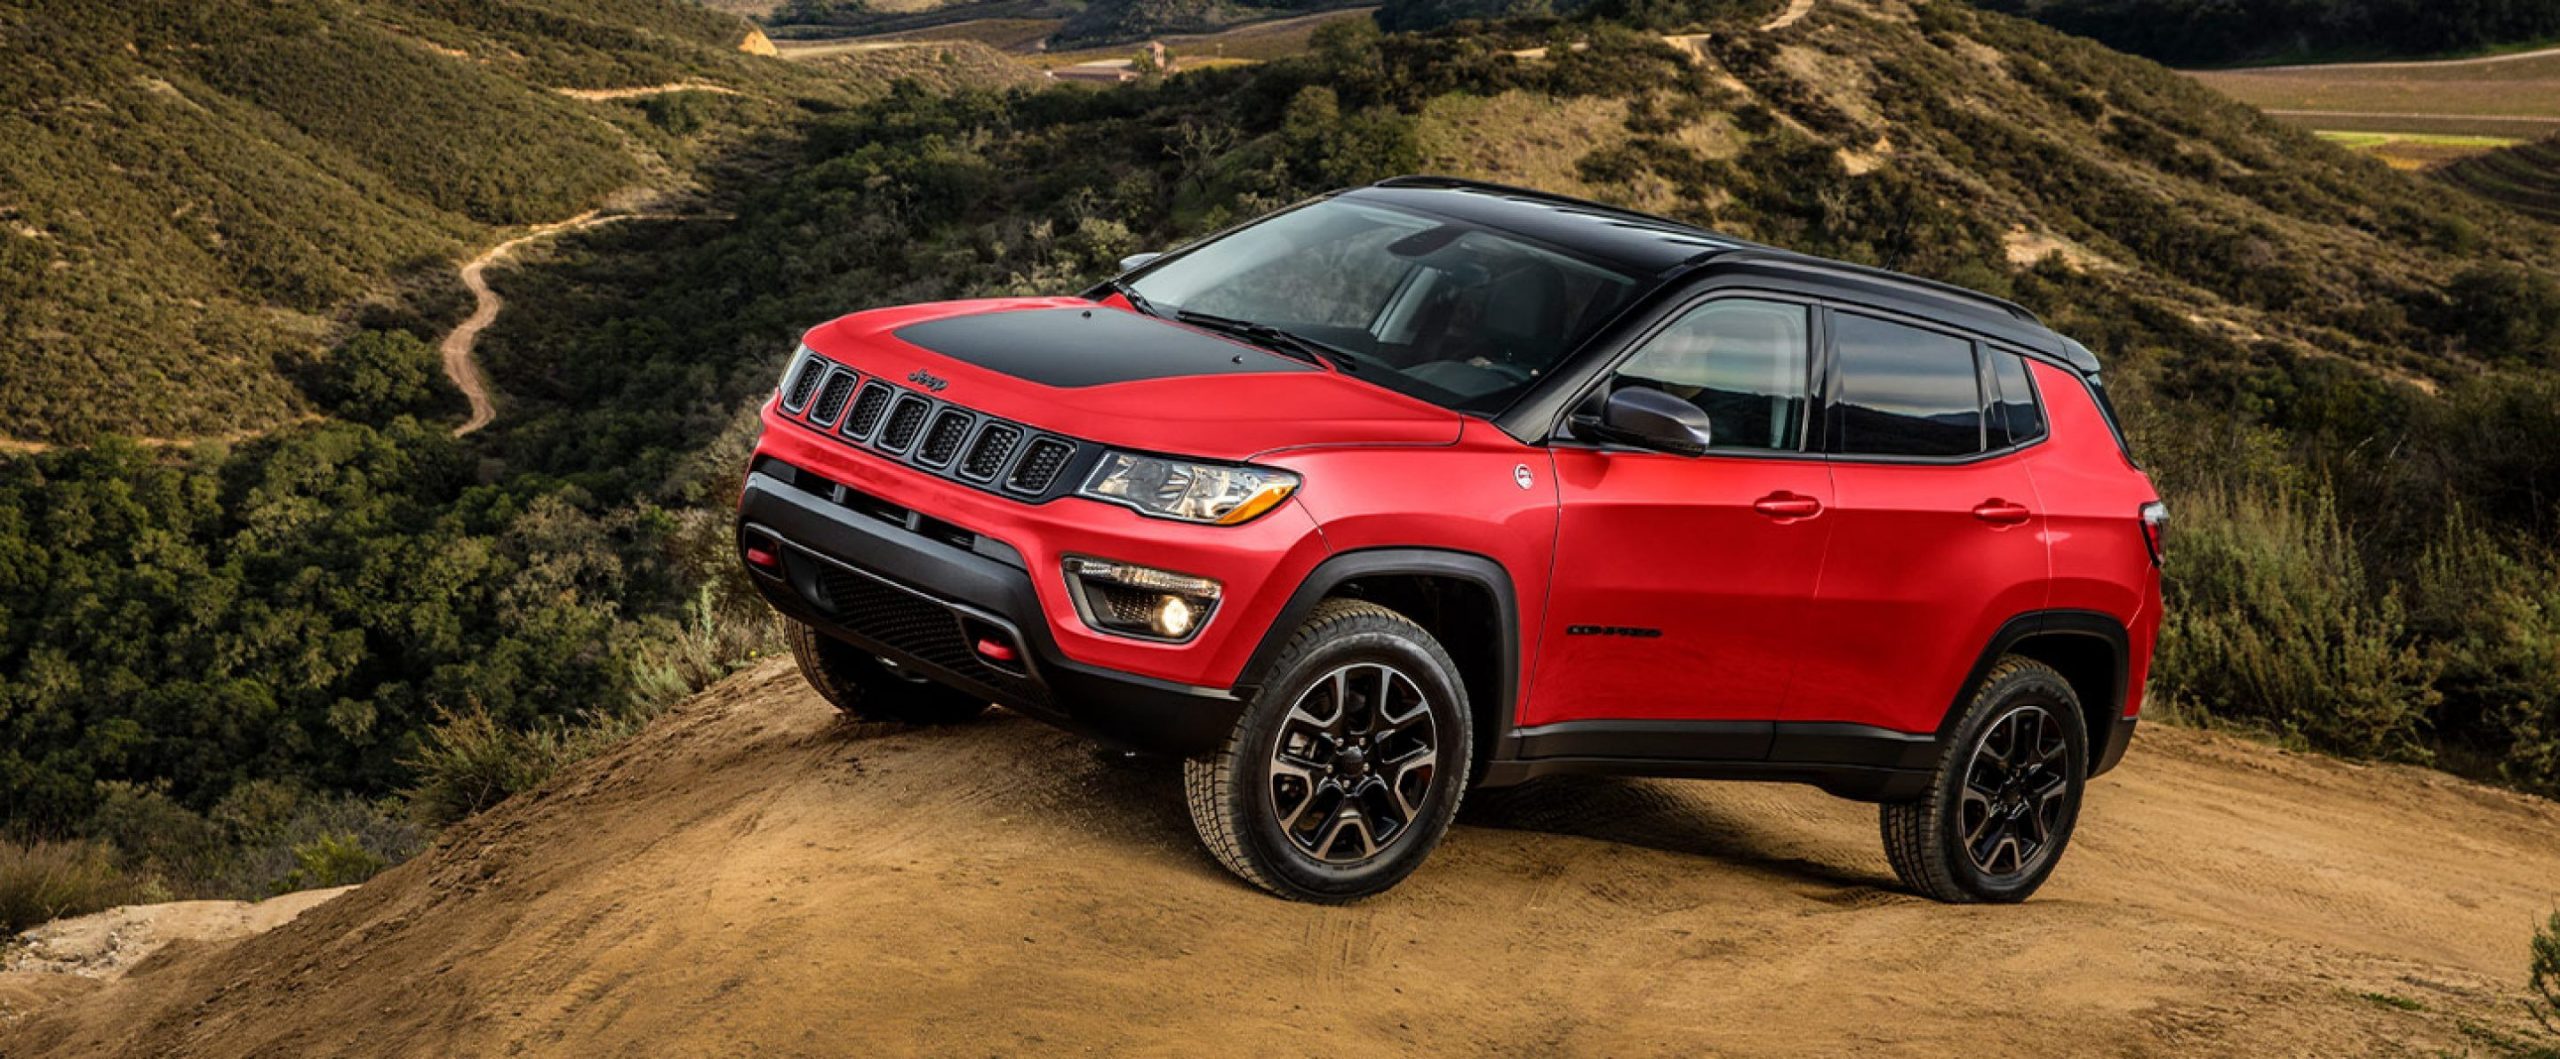 2021 Jeep Compass off-roading